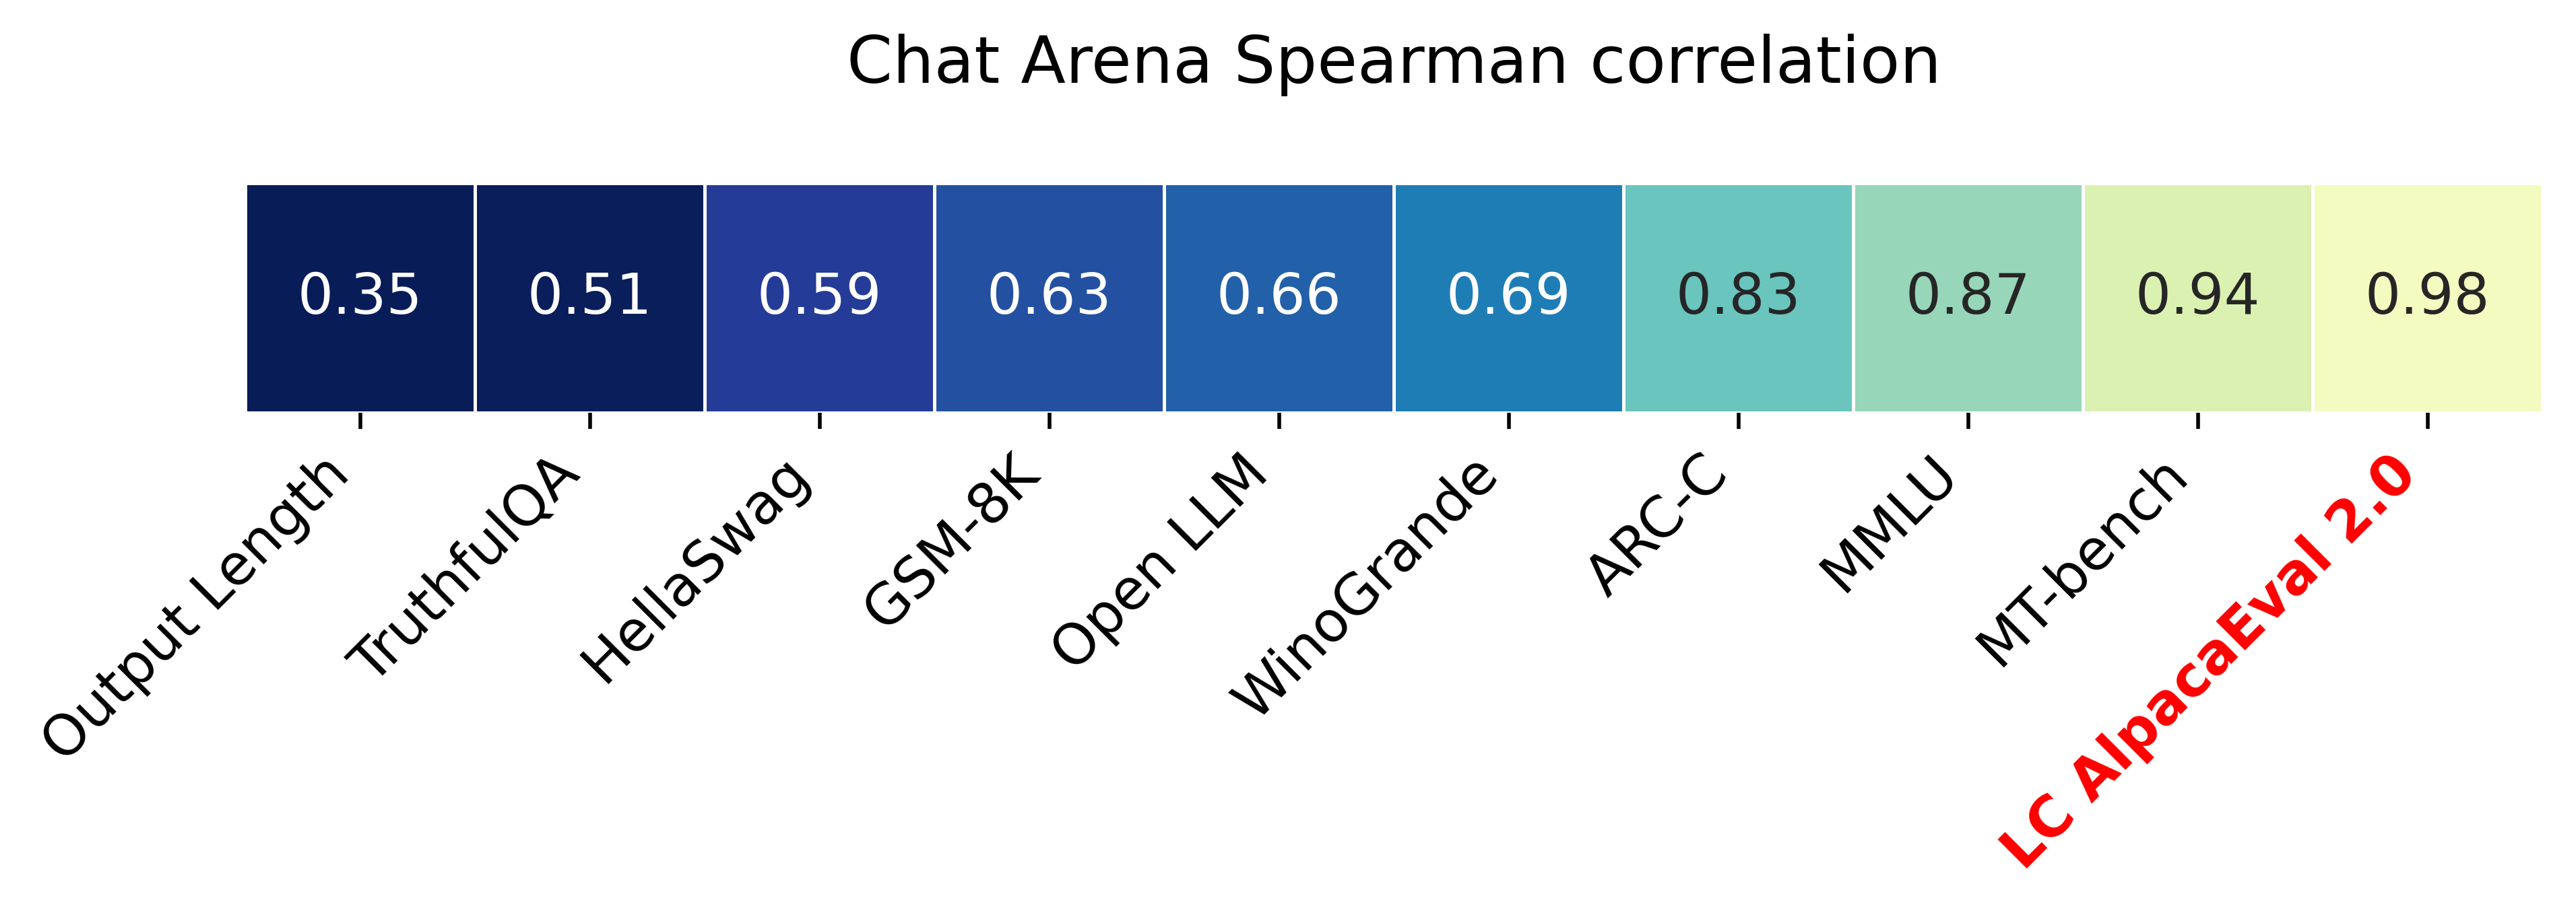 LC AlpacaEval is the most highly correlated benchmark with Chat Arena.